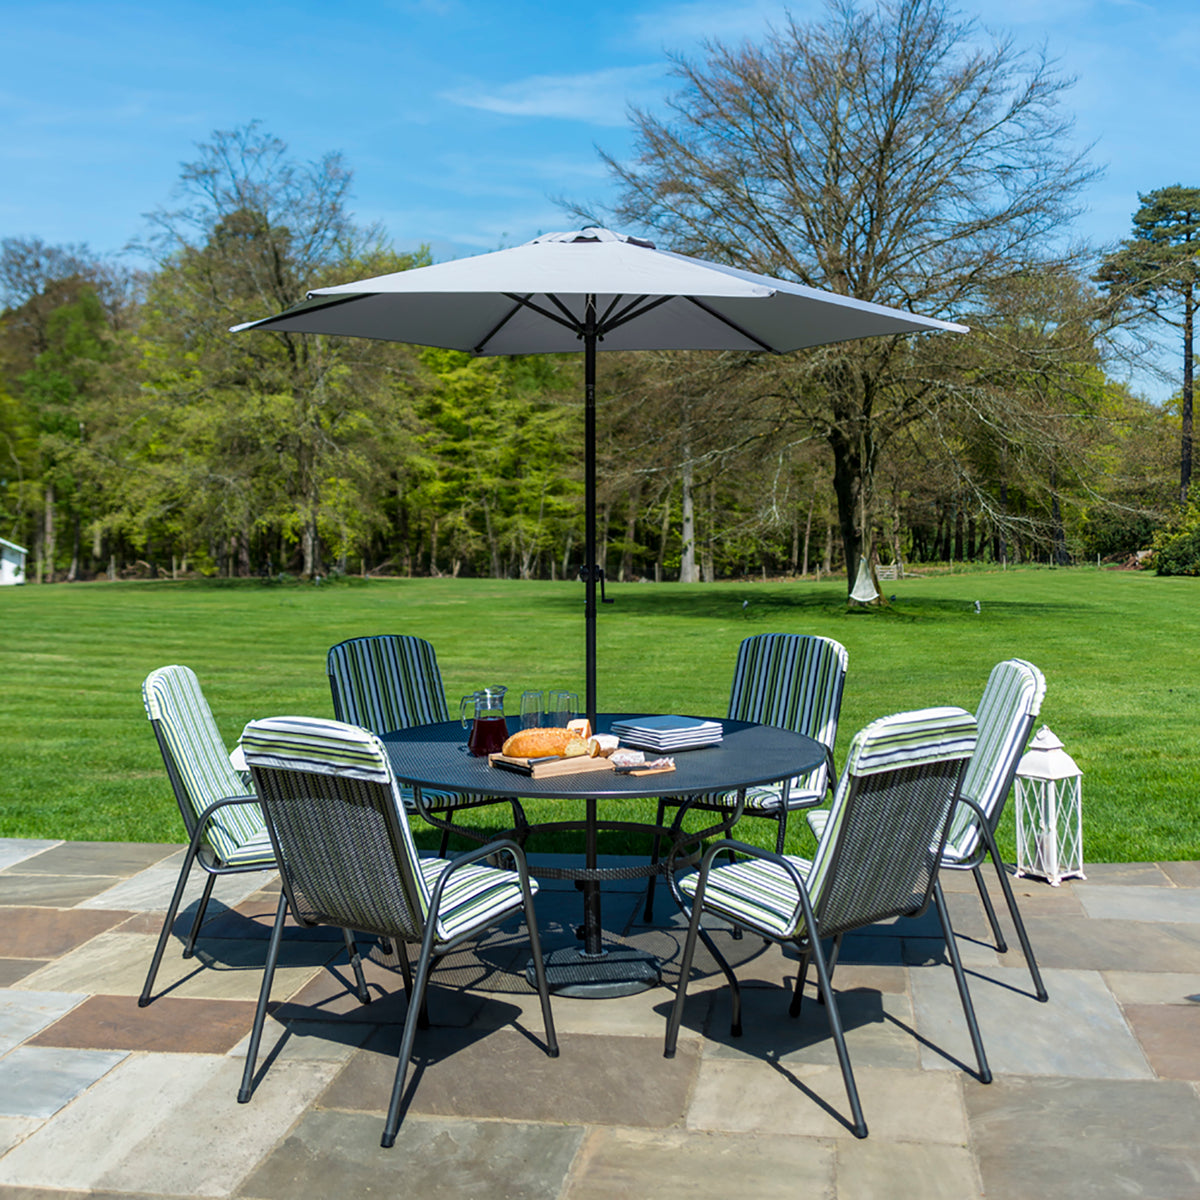 Alexander Rose Portofino 6 Seater Metal Garden Furniture Set with 1.5m Round Table and High Back Armchairs